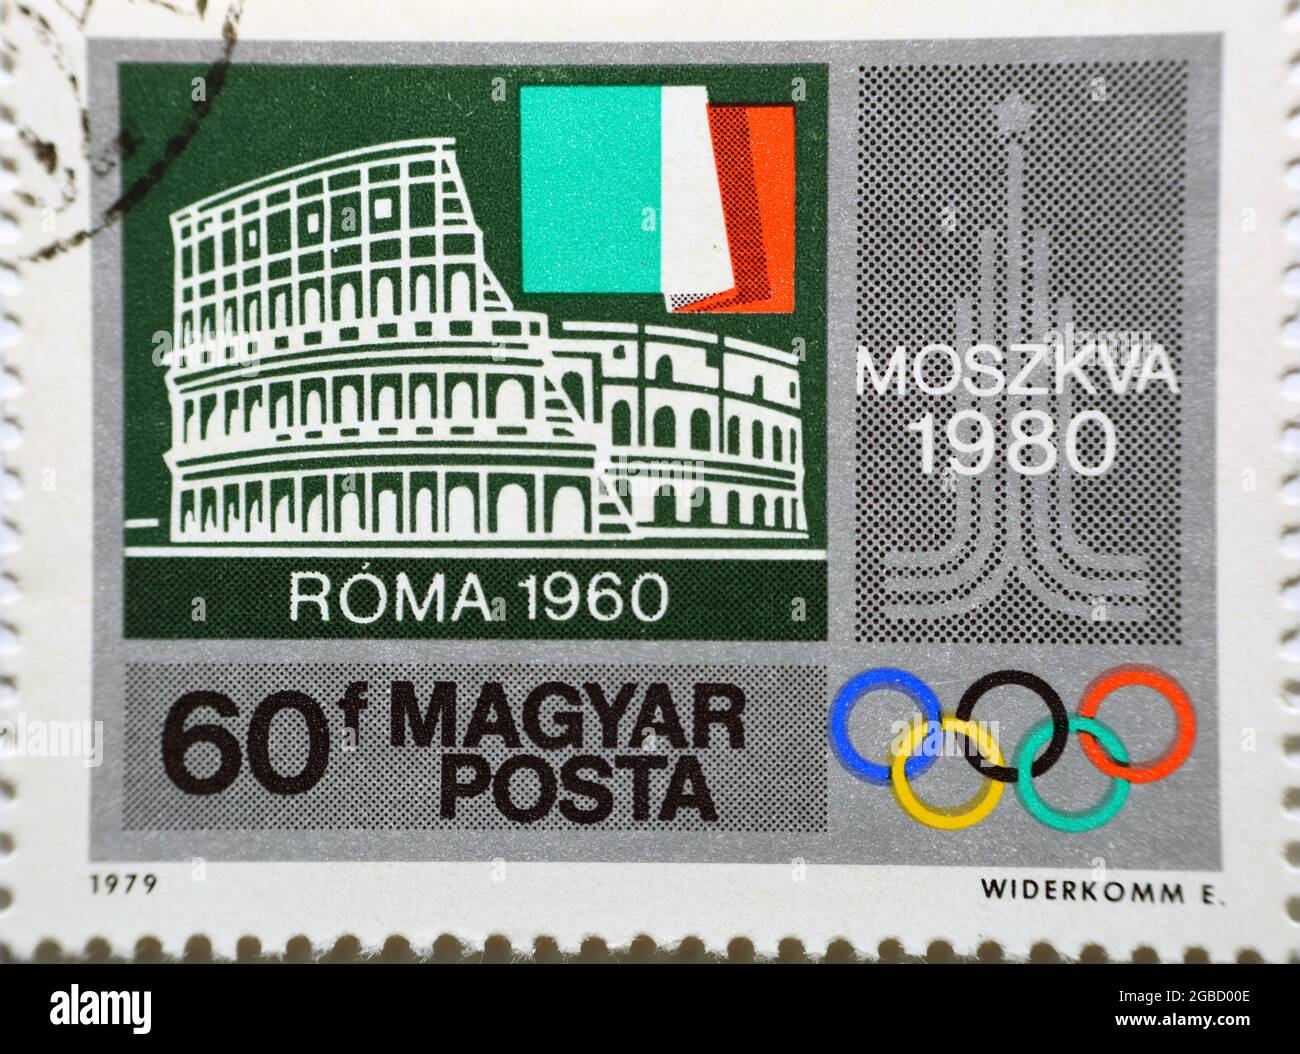 A postage stamp printed in Hungary shows Moscow ’80 Olympic emblem and Colosseum, Rome, Italian flag, Rome 1960, circa 1979, Summer Olympic Games, 198 Stock Photo